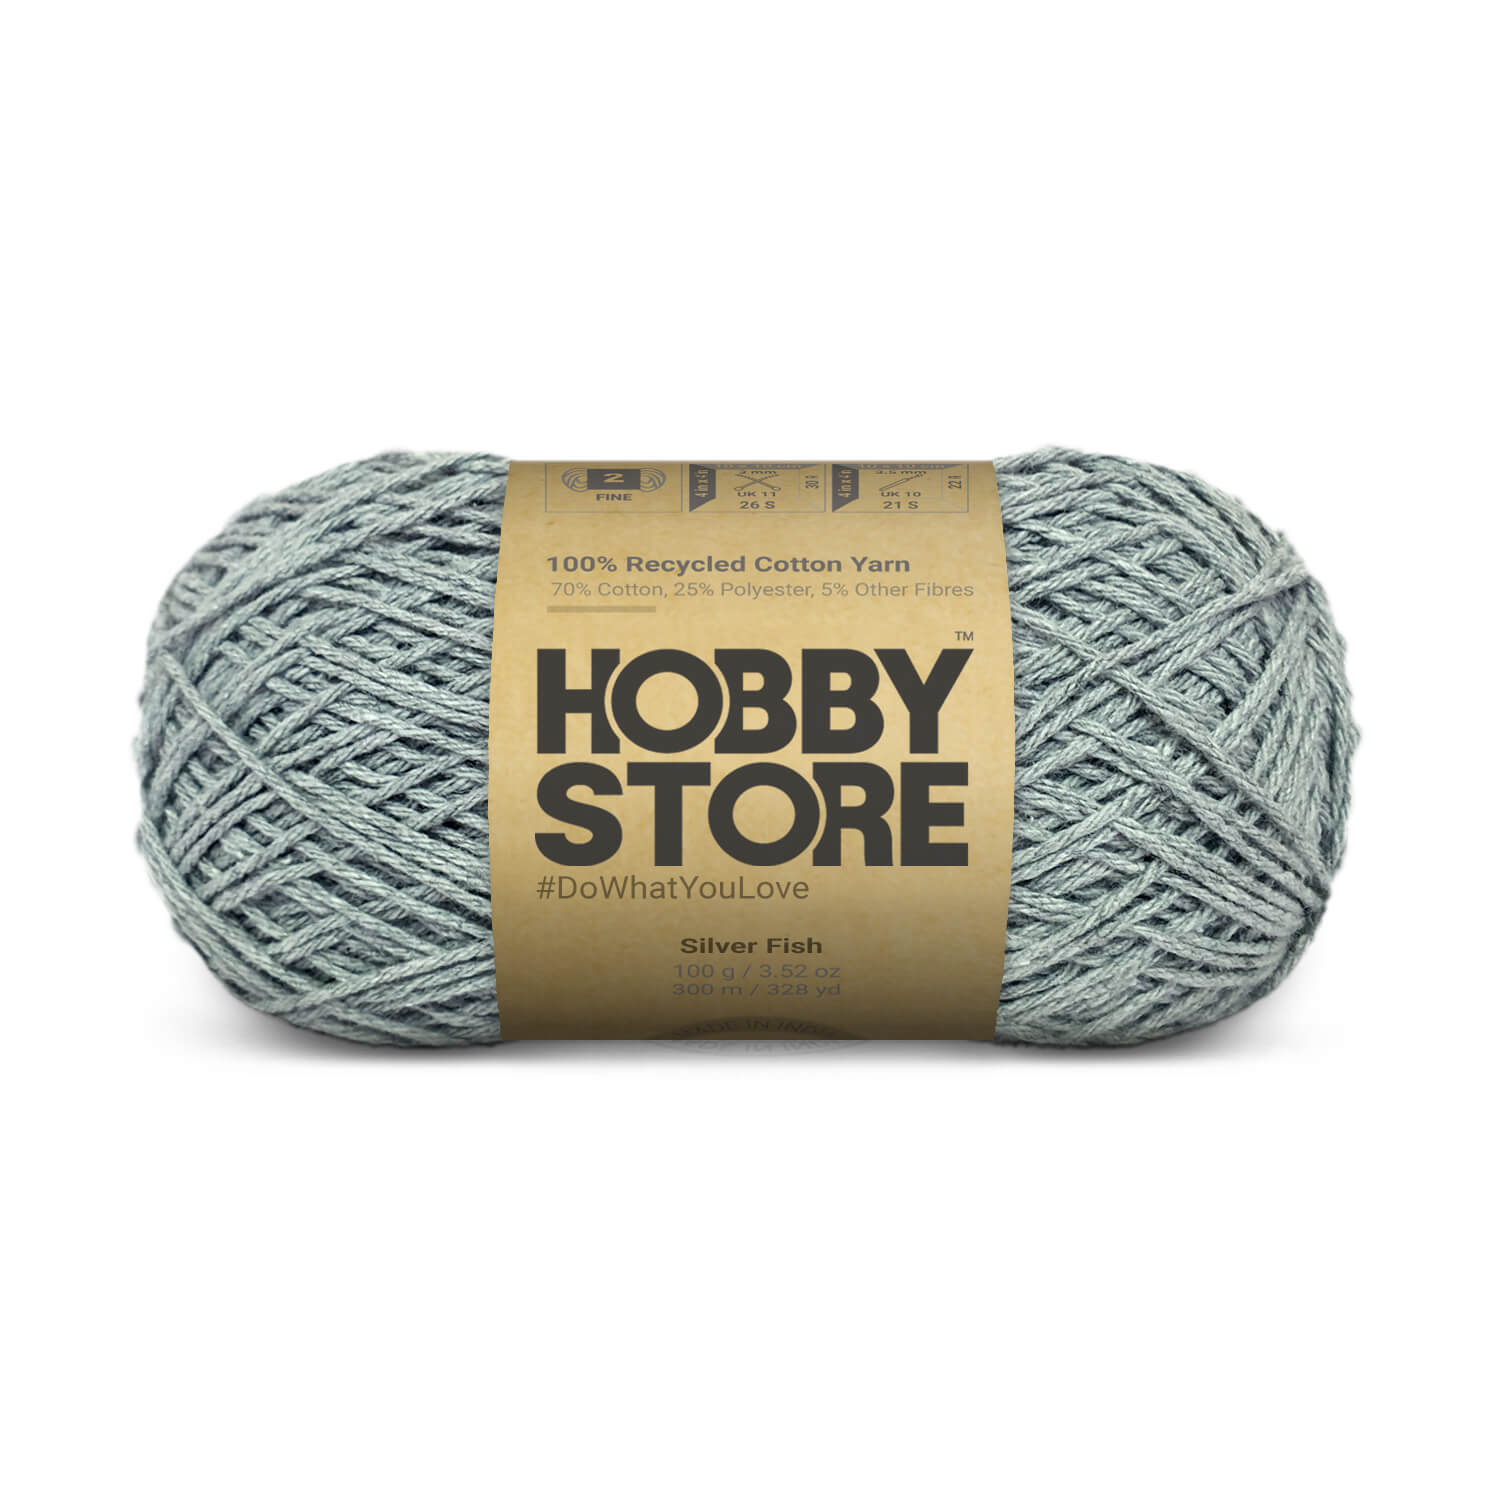 Hobby Store Recycled Cotton Yarn - Silver Fish 8301